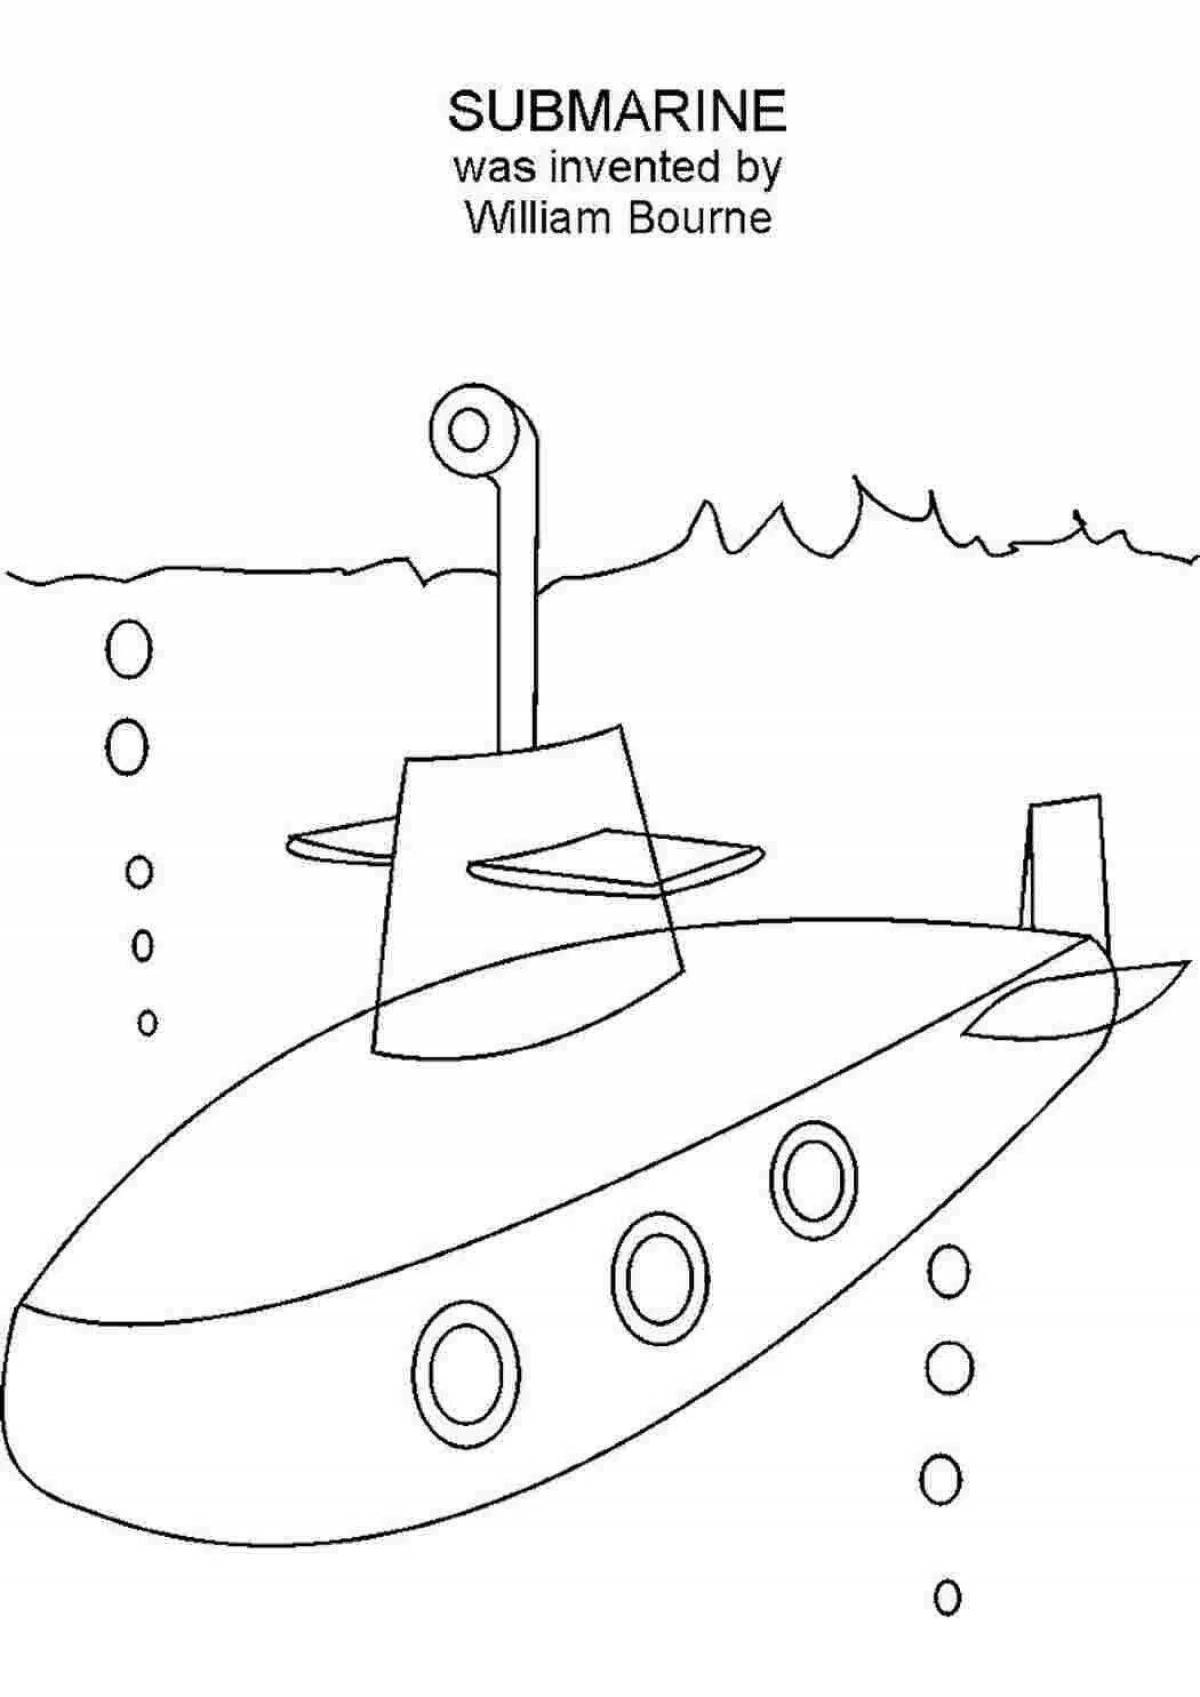 Fantastic submarine coloring book for 5-6 year olds